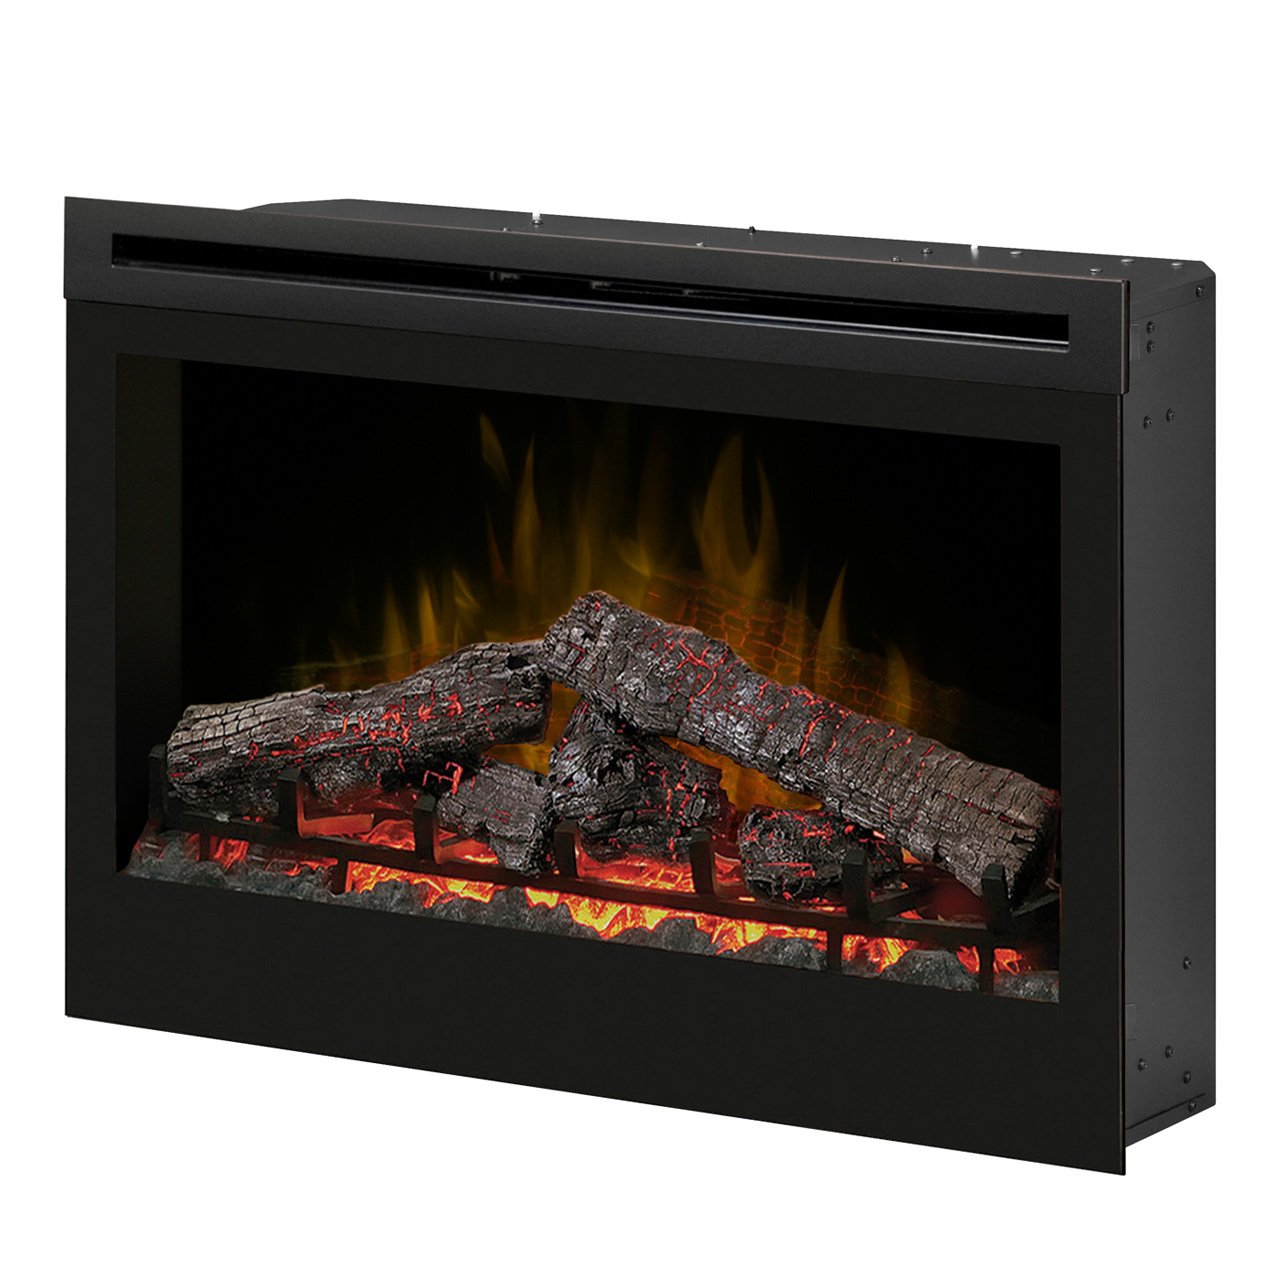 Black and White Fireplace Fresh Dimplex Df3033st 33 Inch Self Trimming Electric Fireplace Insert